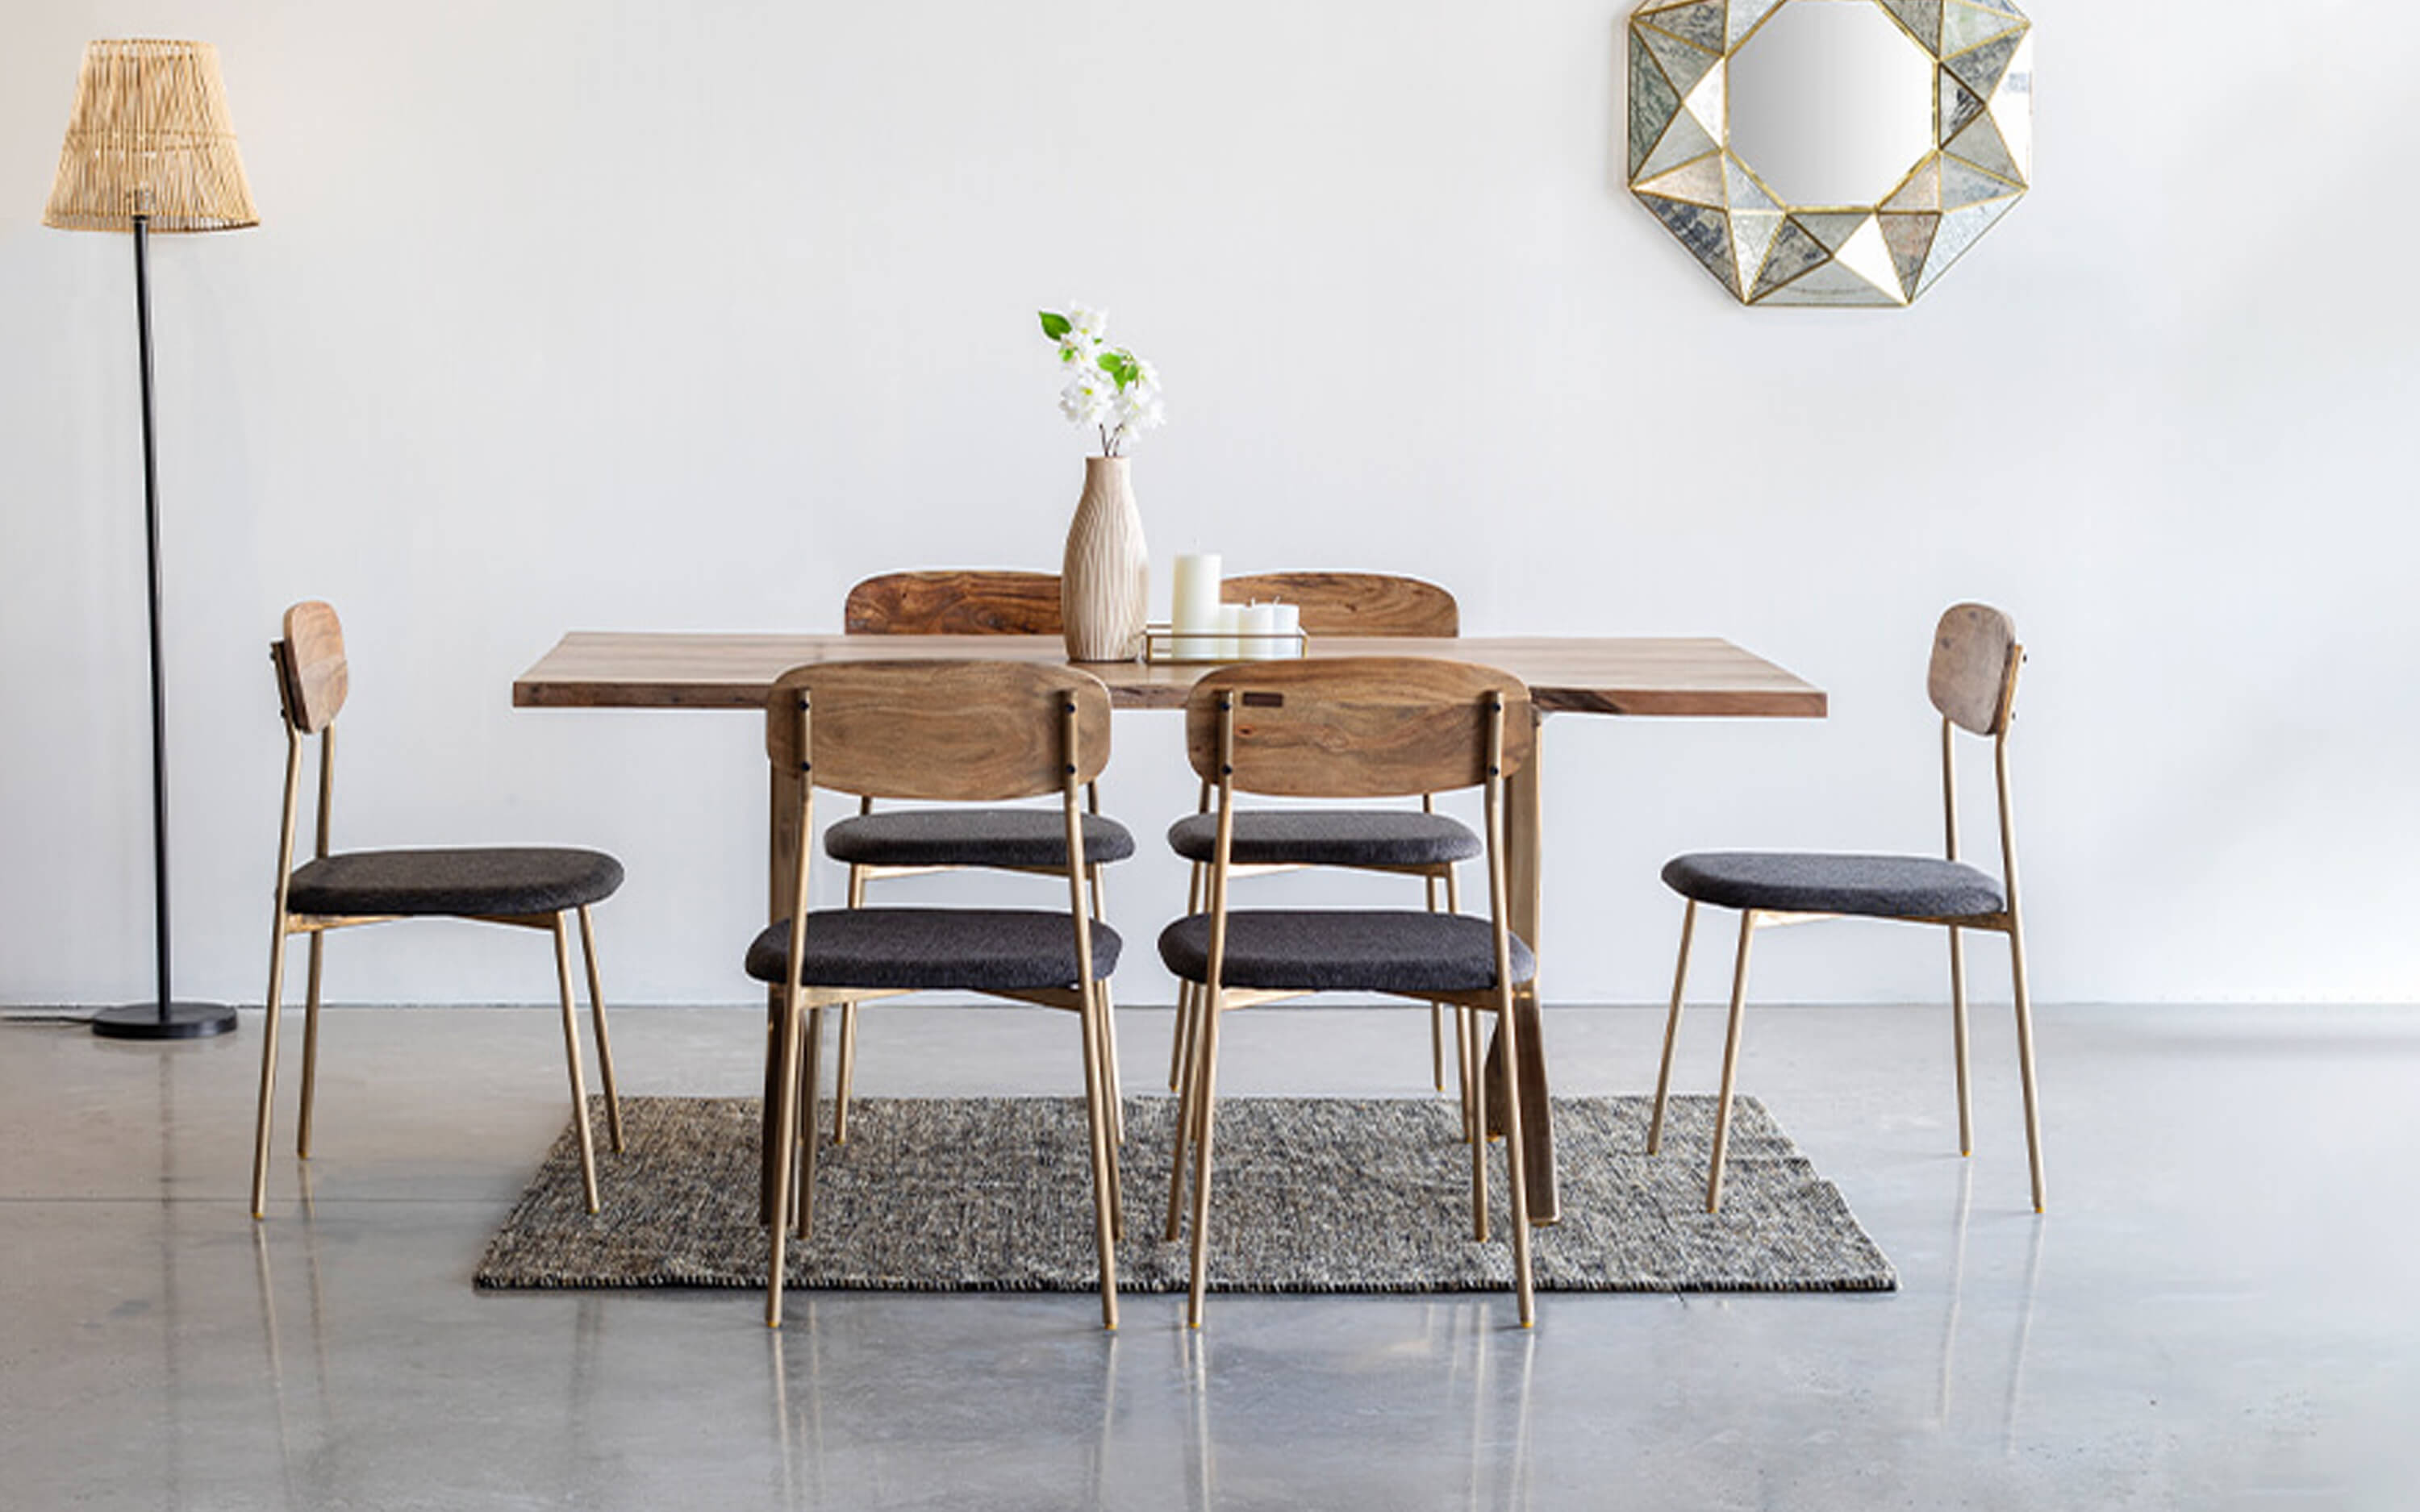 Yoho Dining Table With 6 Chairs -Adding a Wall Mirror: Reflecting Beauty